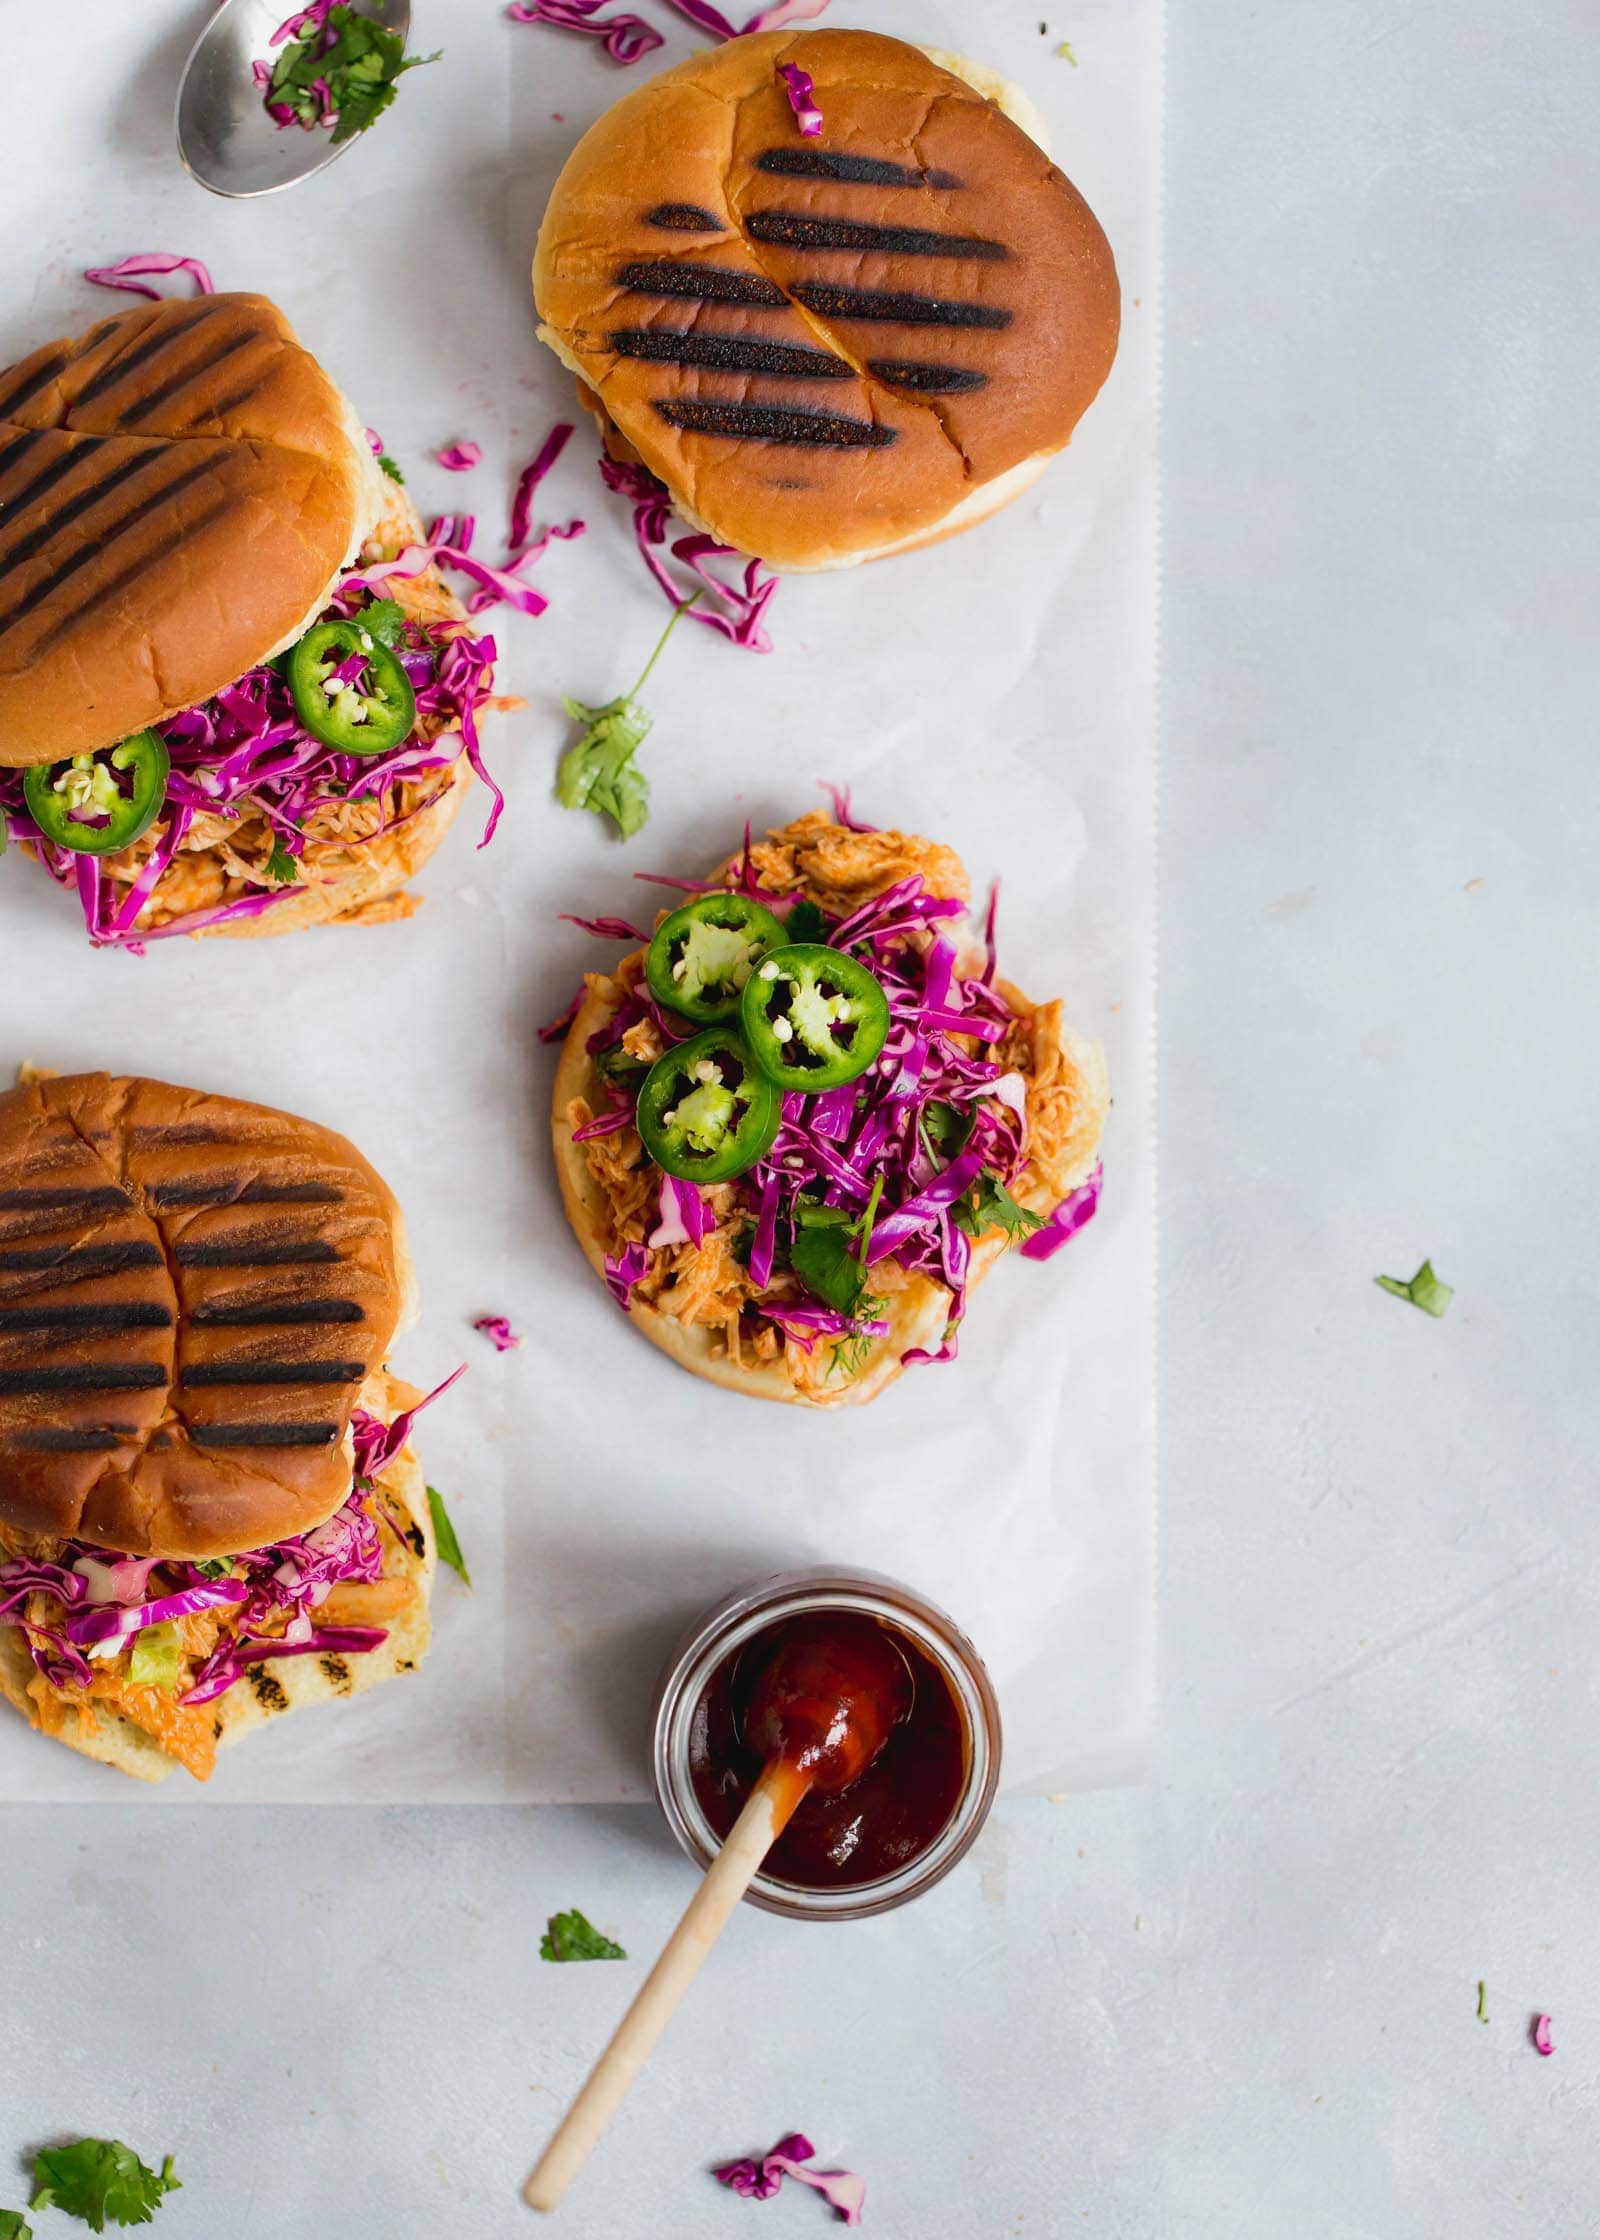 Slow Cooker Asian BBQ Pulled Chicken Sandwiches with a cilantro and purple cabbage slaw. No fuss and all flavor!